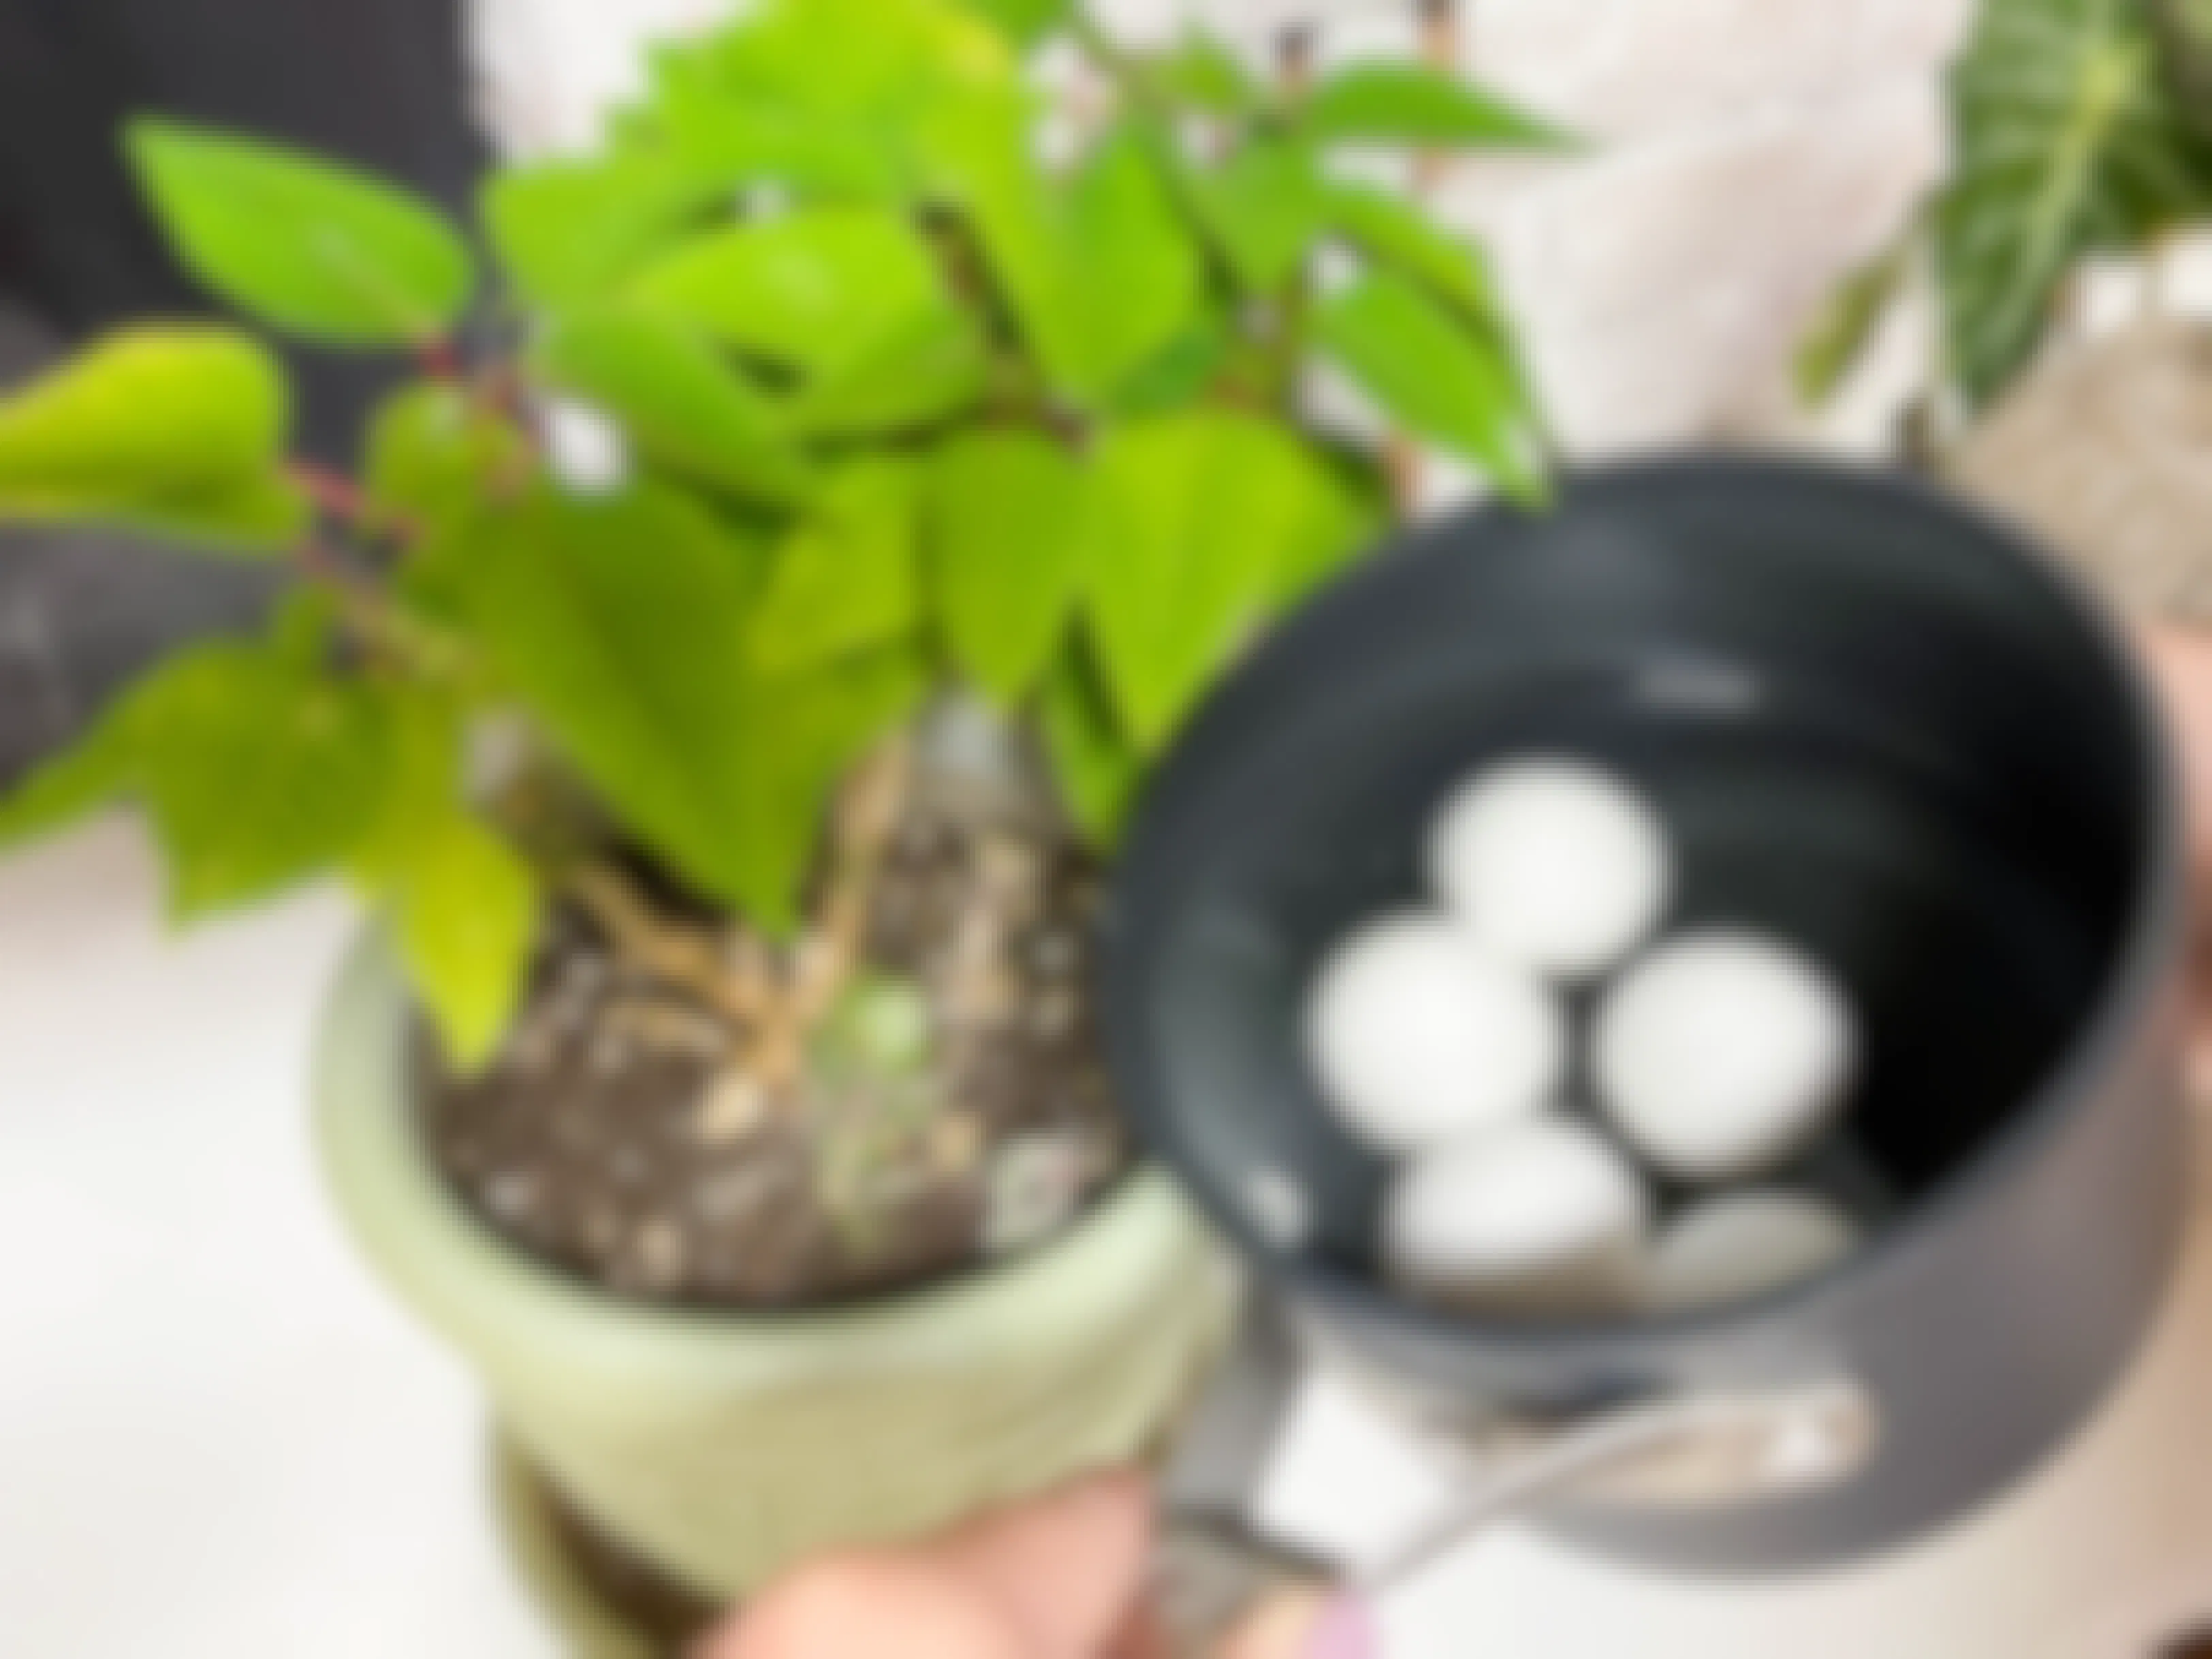 pouring water from a pot of boiled eggs into houseplant soil